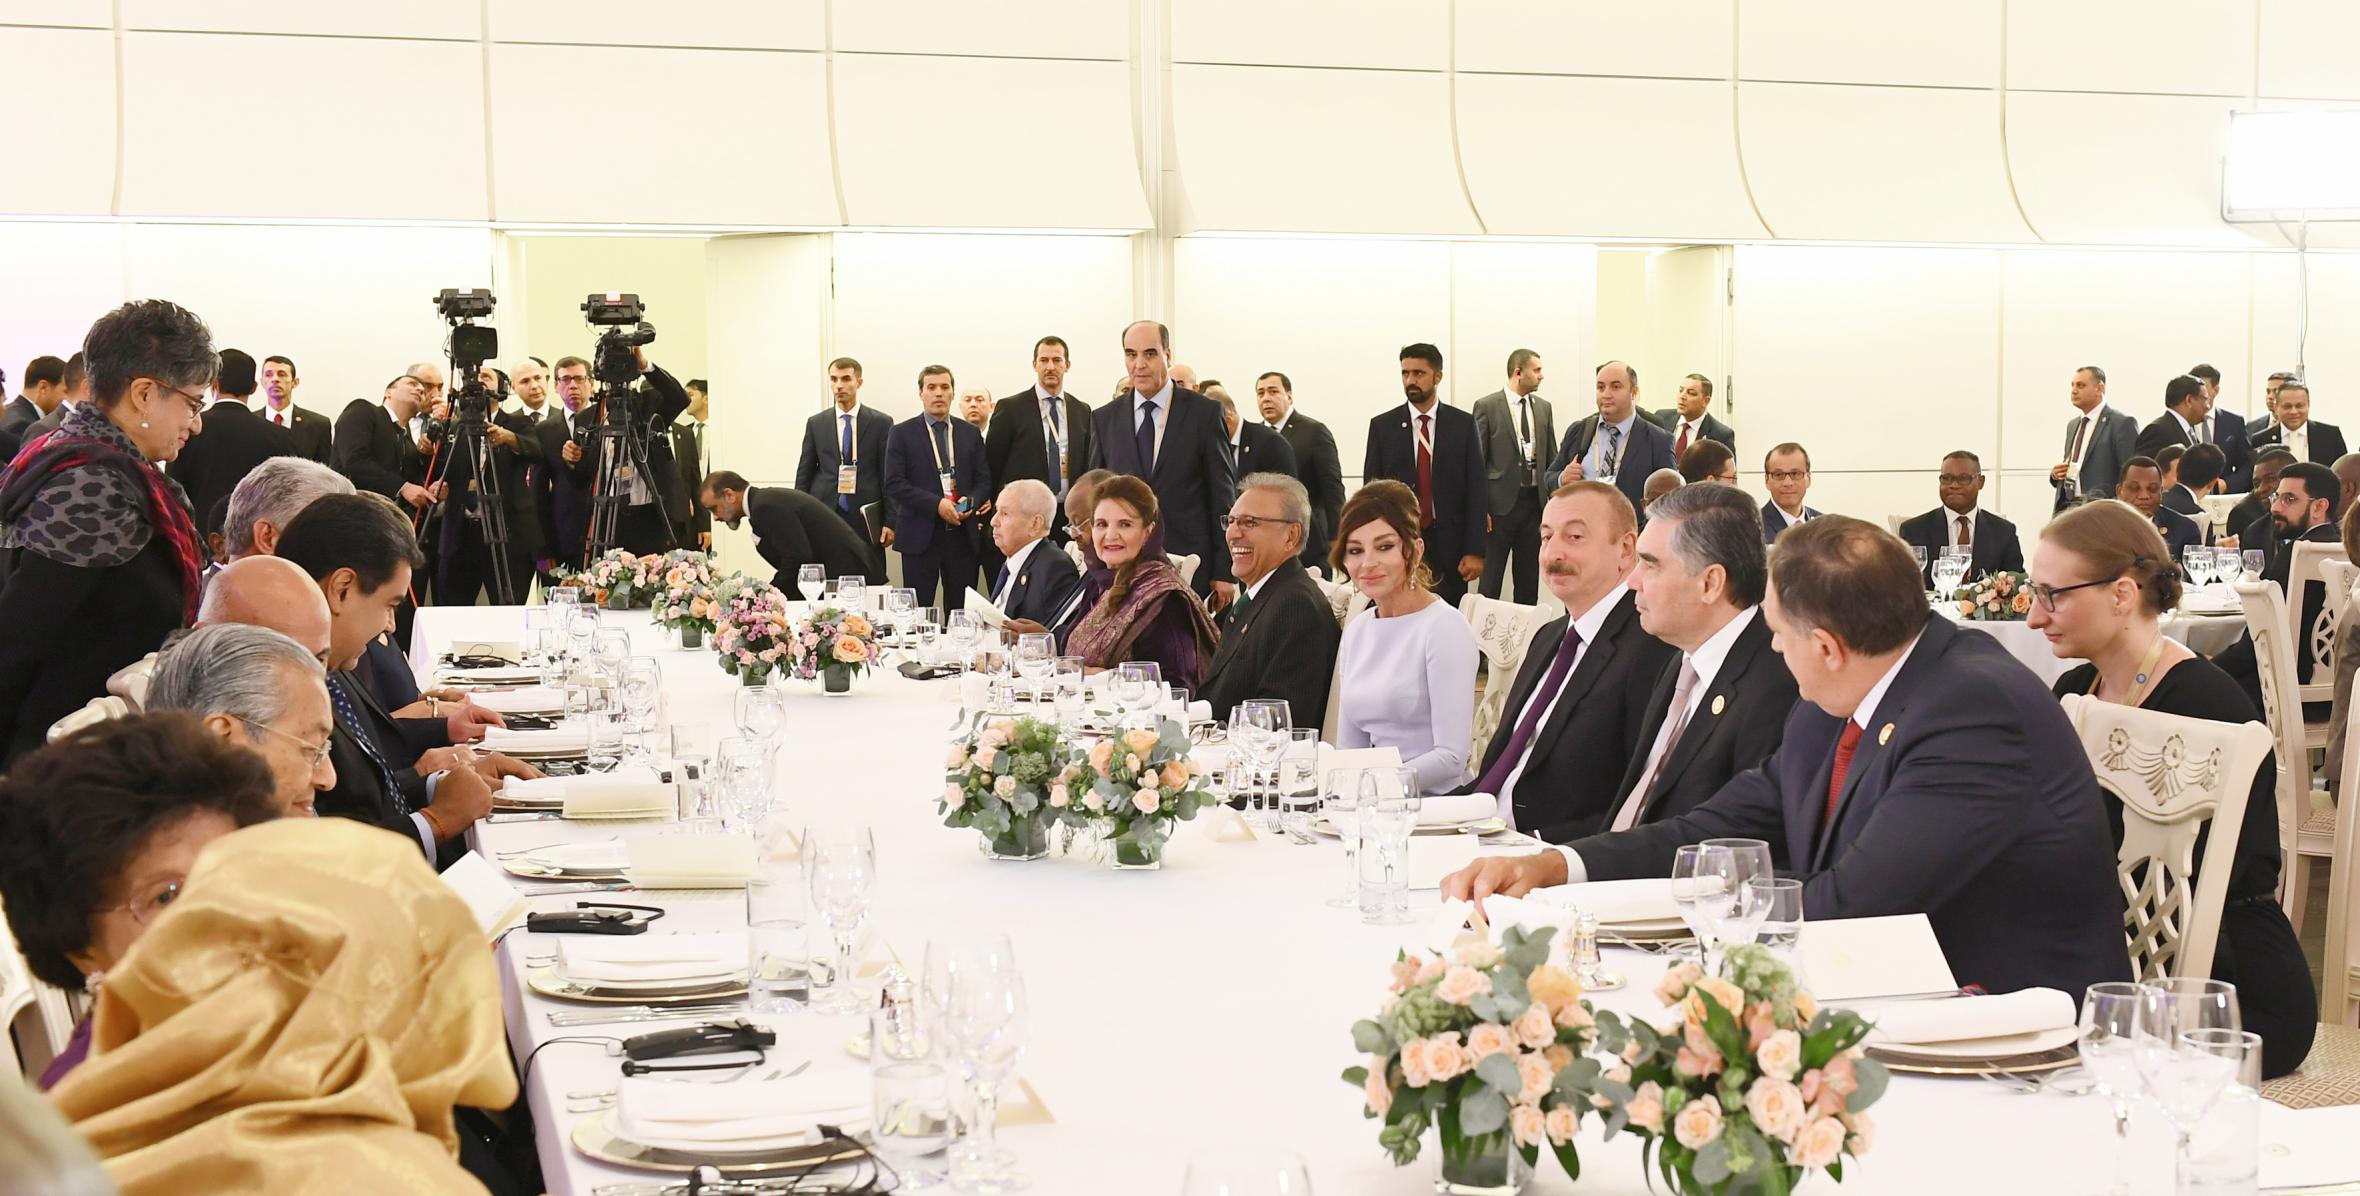 Ilham Aliyev hosted official reception in honor of heads of state and government participating in Baku Summit